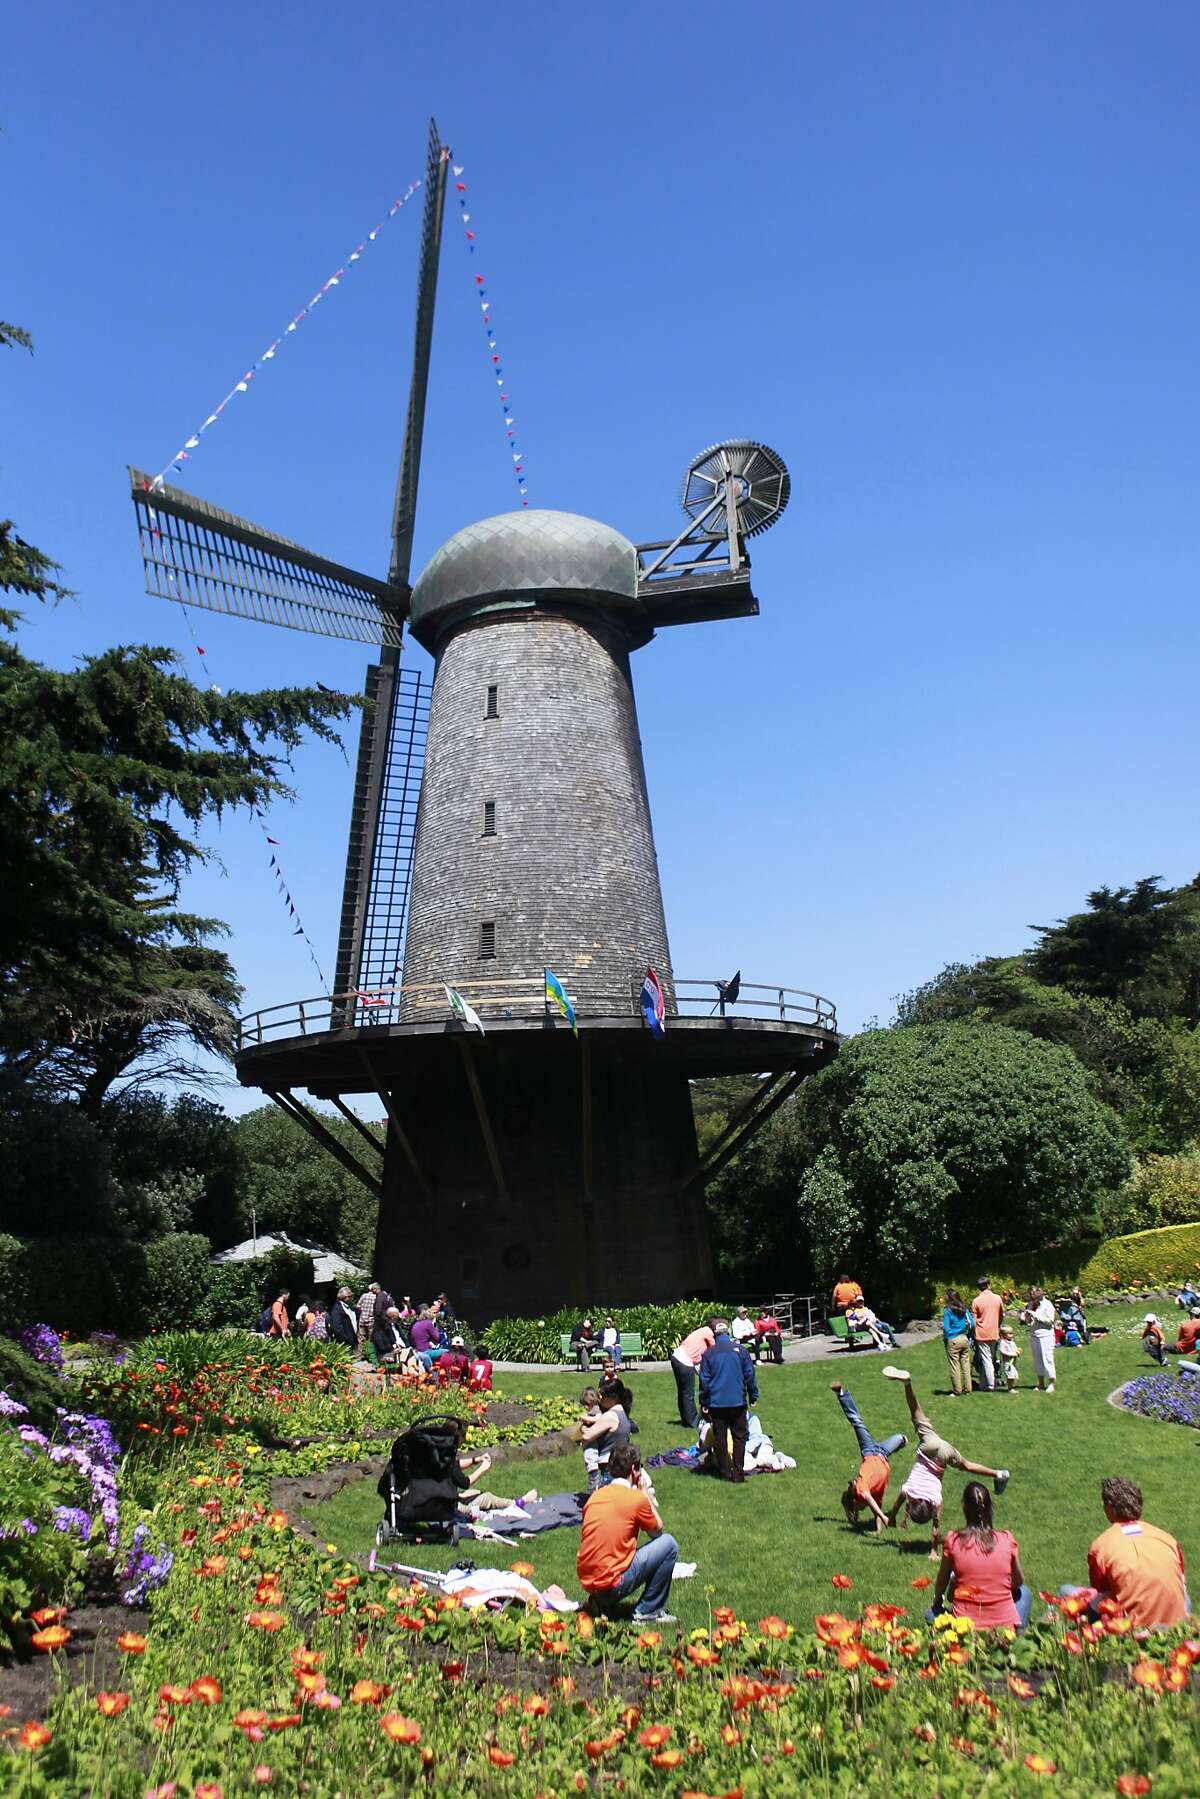 Celebrating Queen's Day near the Dutch Windmill in Golden Gate Park in San Francisco, California , on Saturday, April 28th, 2012.